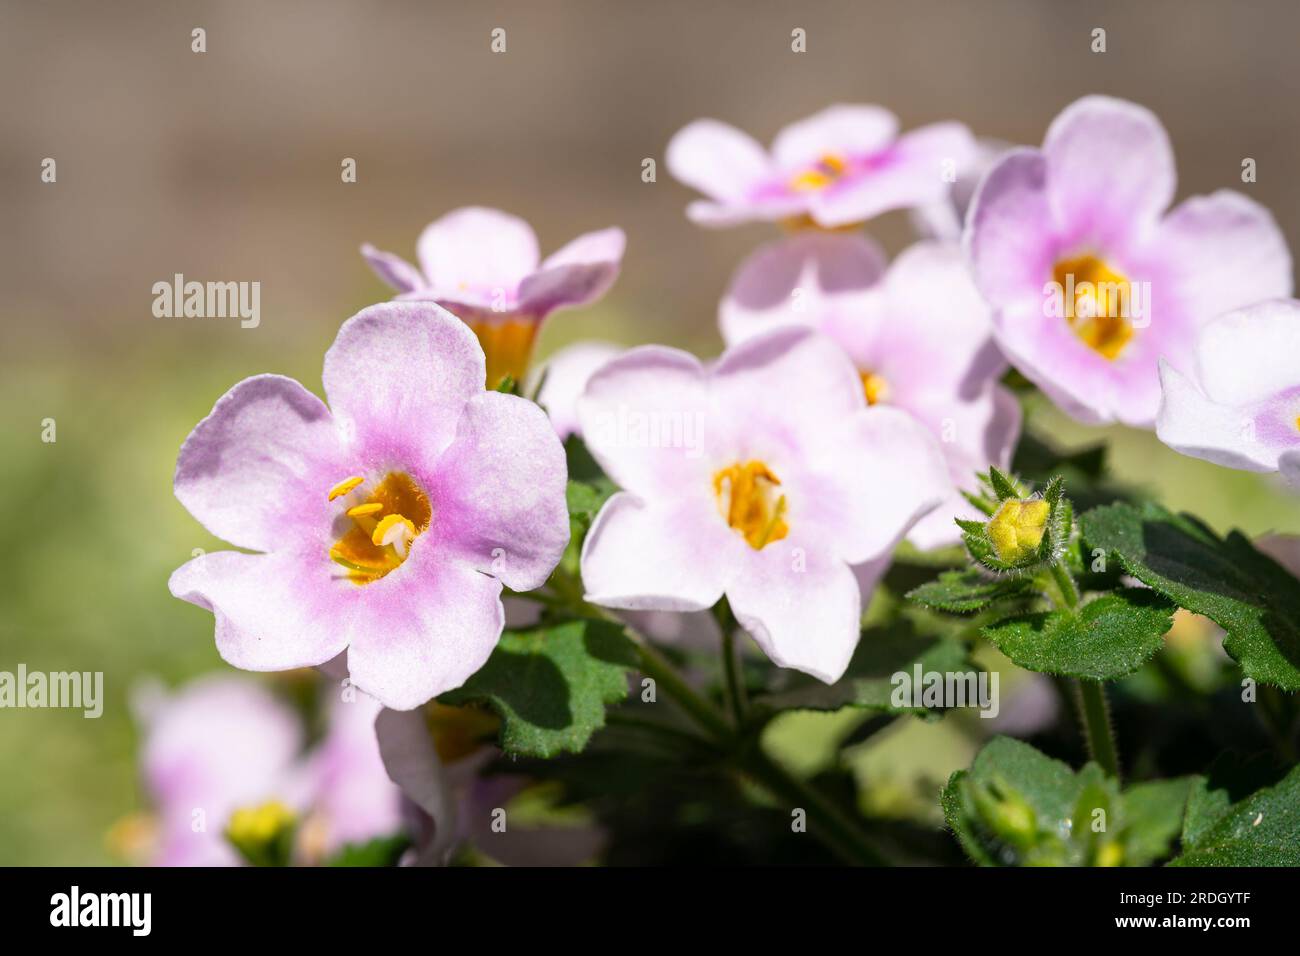 Detailed image of the light pink flowers of Bacopa (Chaenostoma cordatum) on a sunny day in spring Stock Photo